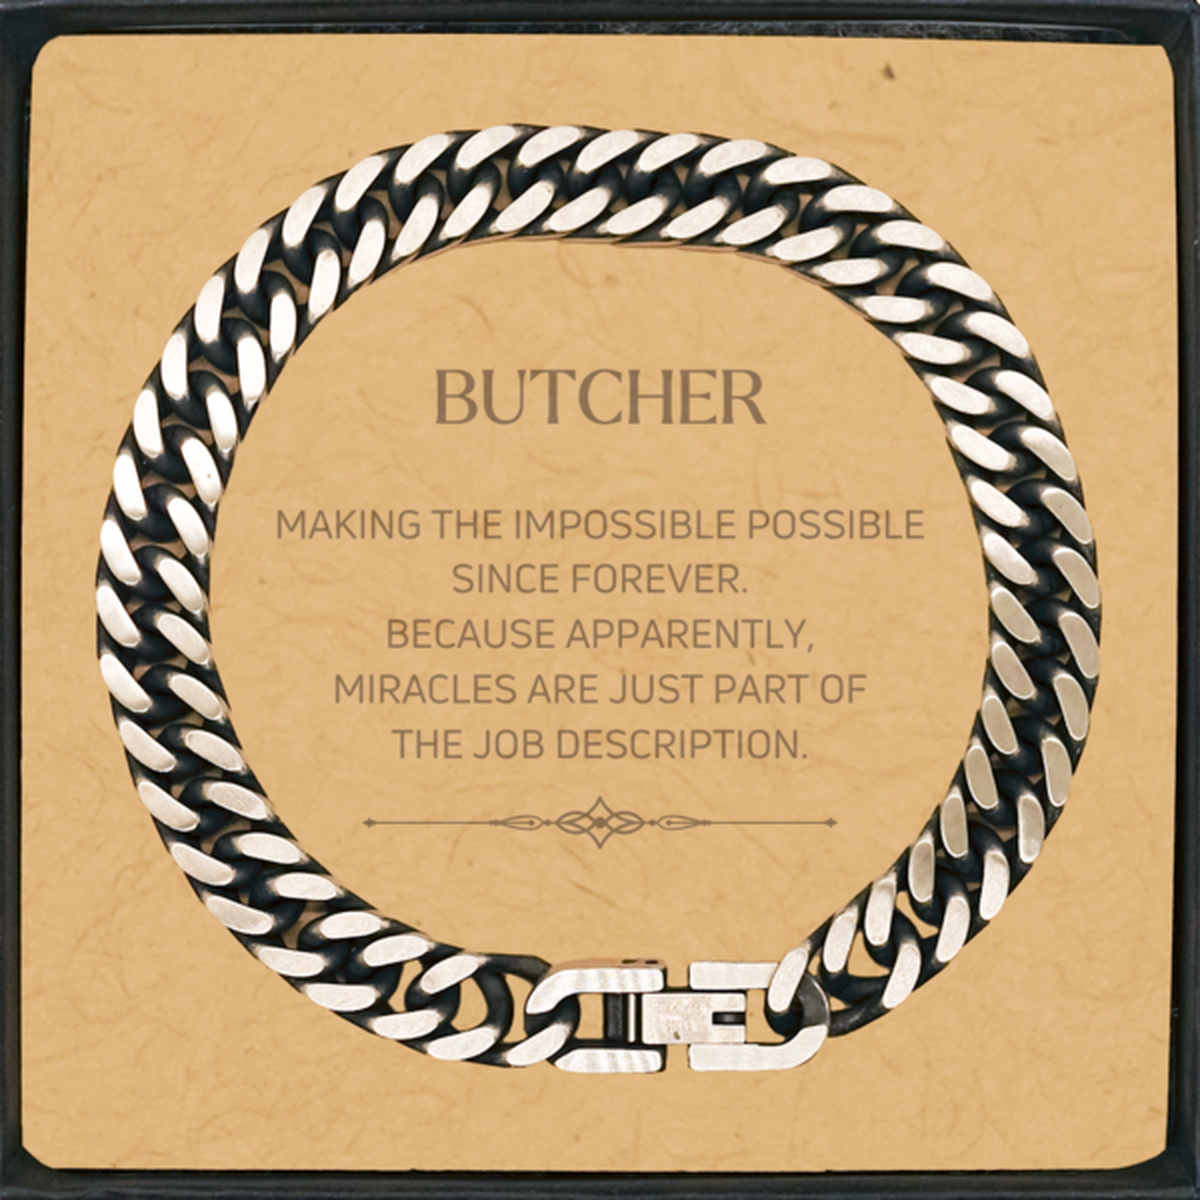 Funny Butcher Gifts, Miracles are just part of the job description, Inspirational Birthday Cuban Link Chain Bracelet For Butcher, Men, Women, Coworkers, Friends, Boss